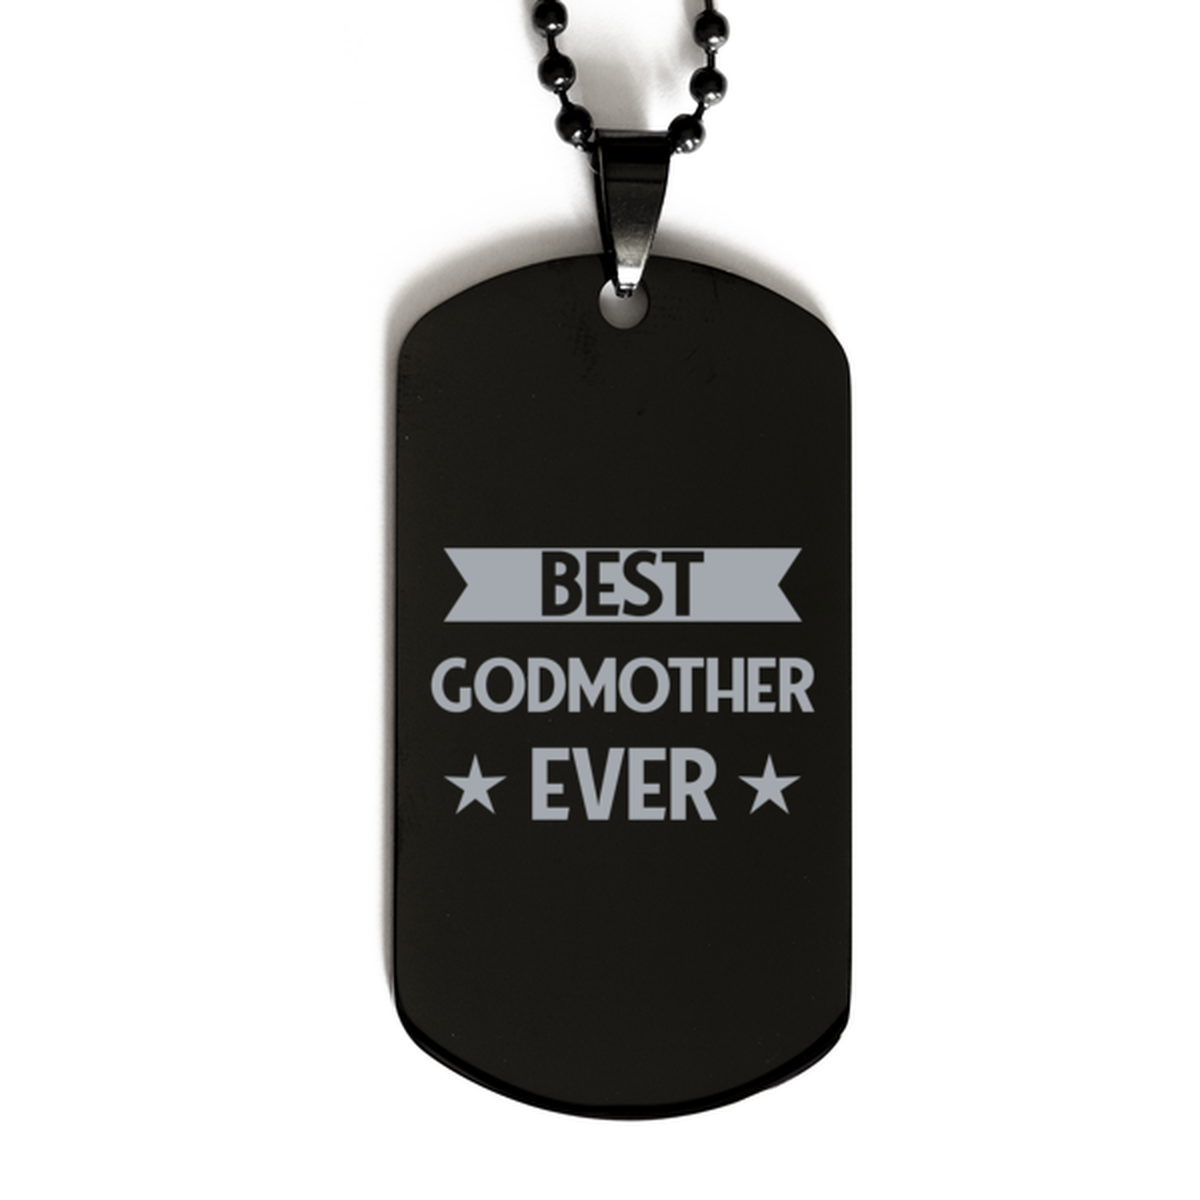 Best Godmother Ever Godmother Gifts, Funny Black Dog Tag For Godmother, Birthday Family Presents Engraved Necklace For Women